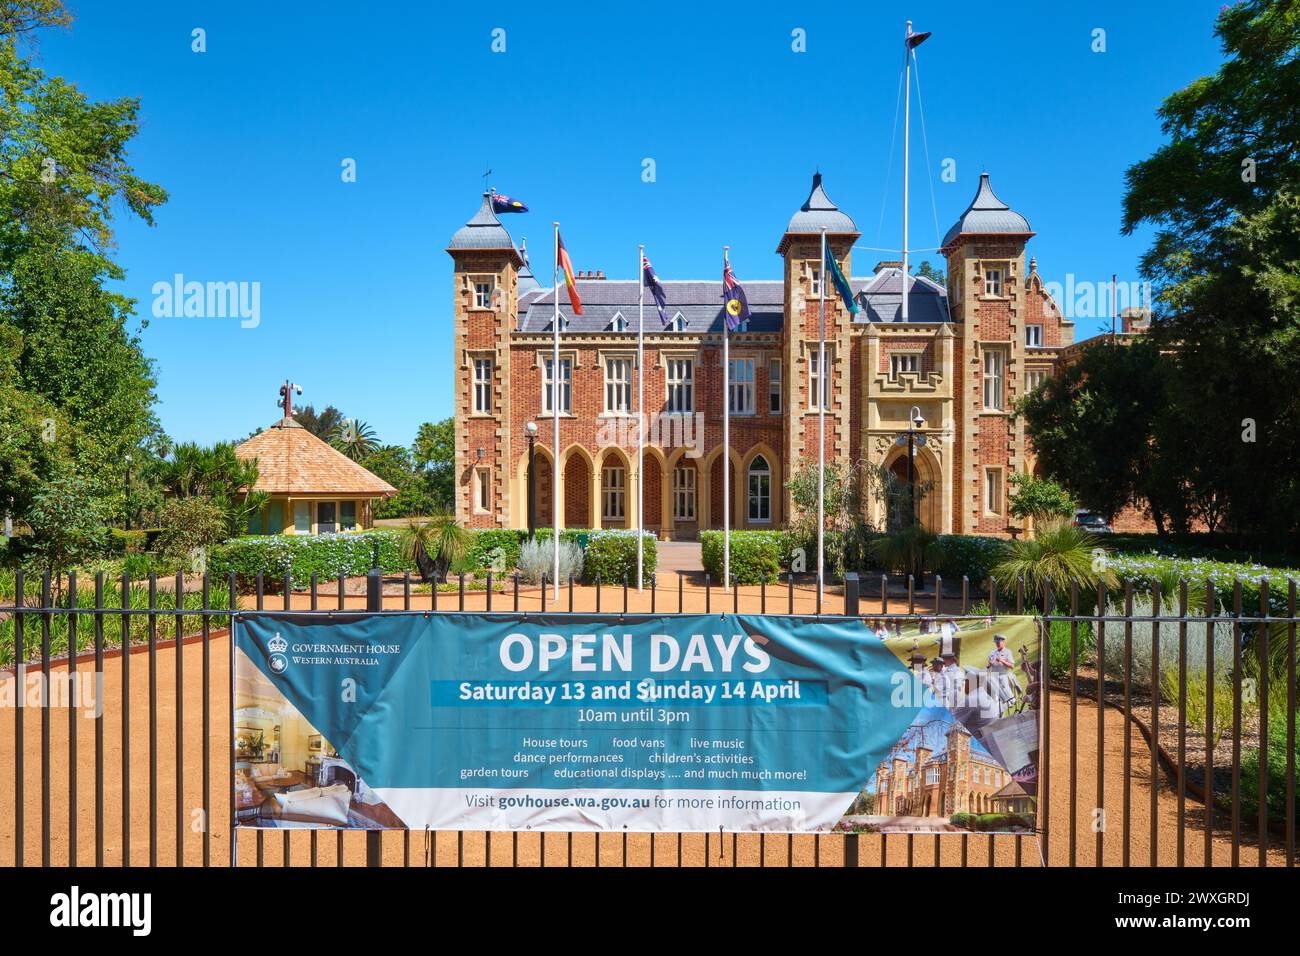 Government House, the official residence of the governor of Western Australia, built 1859-1864 in the Jacobean Revival style, Perth, Western Australia Stock Photo